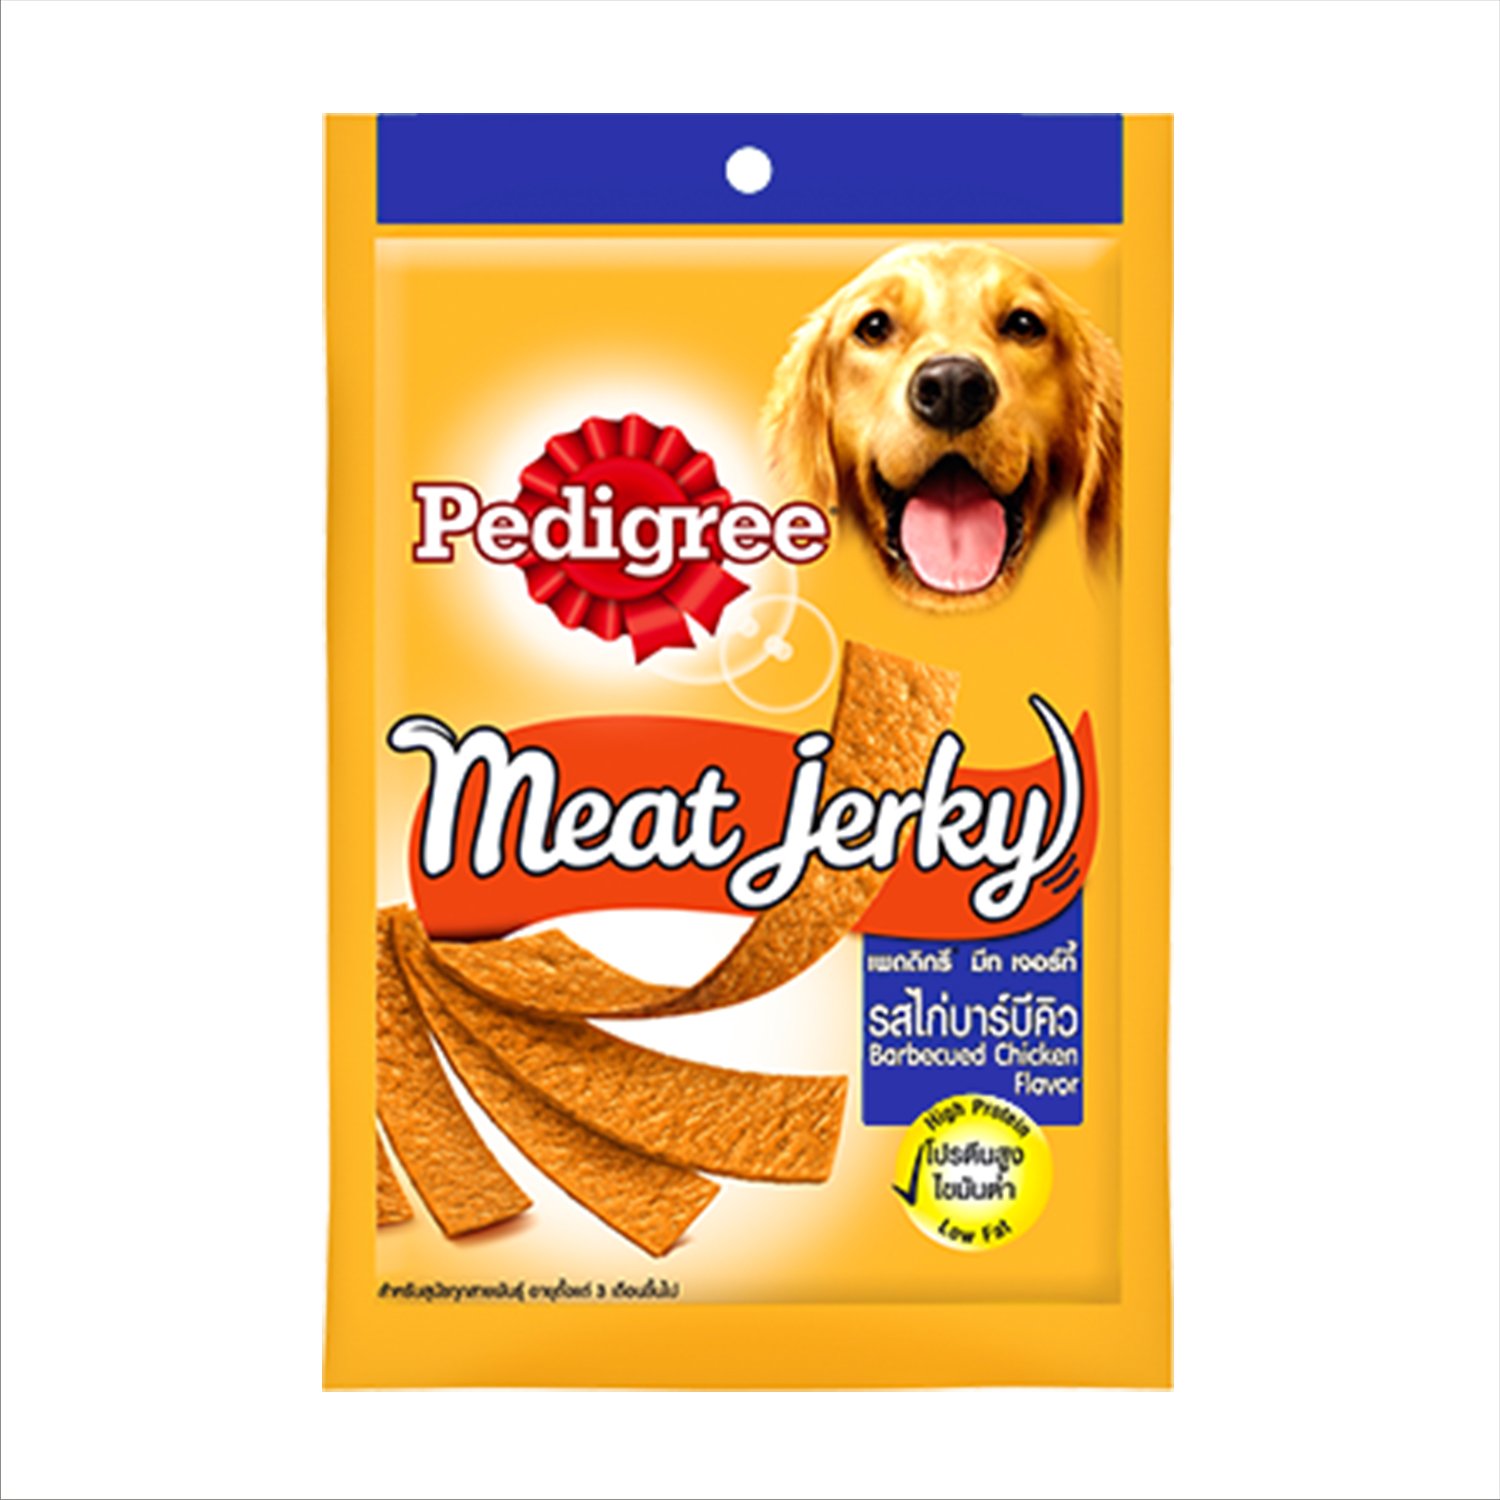 Pedigree Meat Jerky Adult Dog Treat Barbecued Chicken 80g